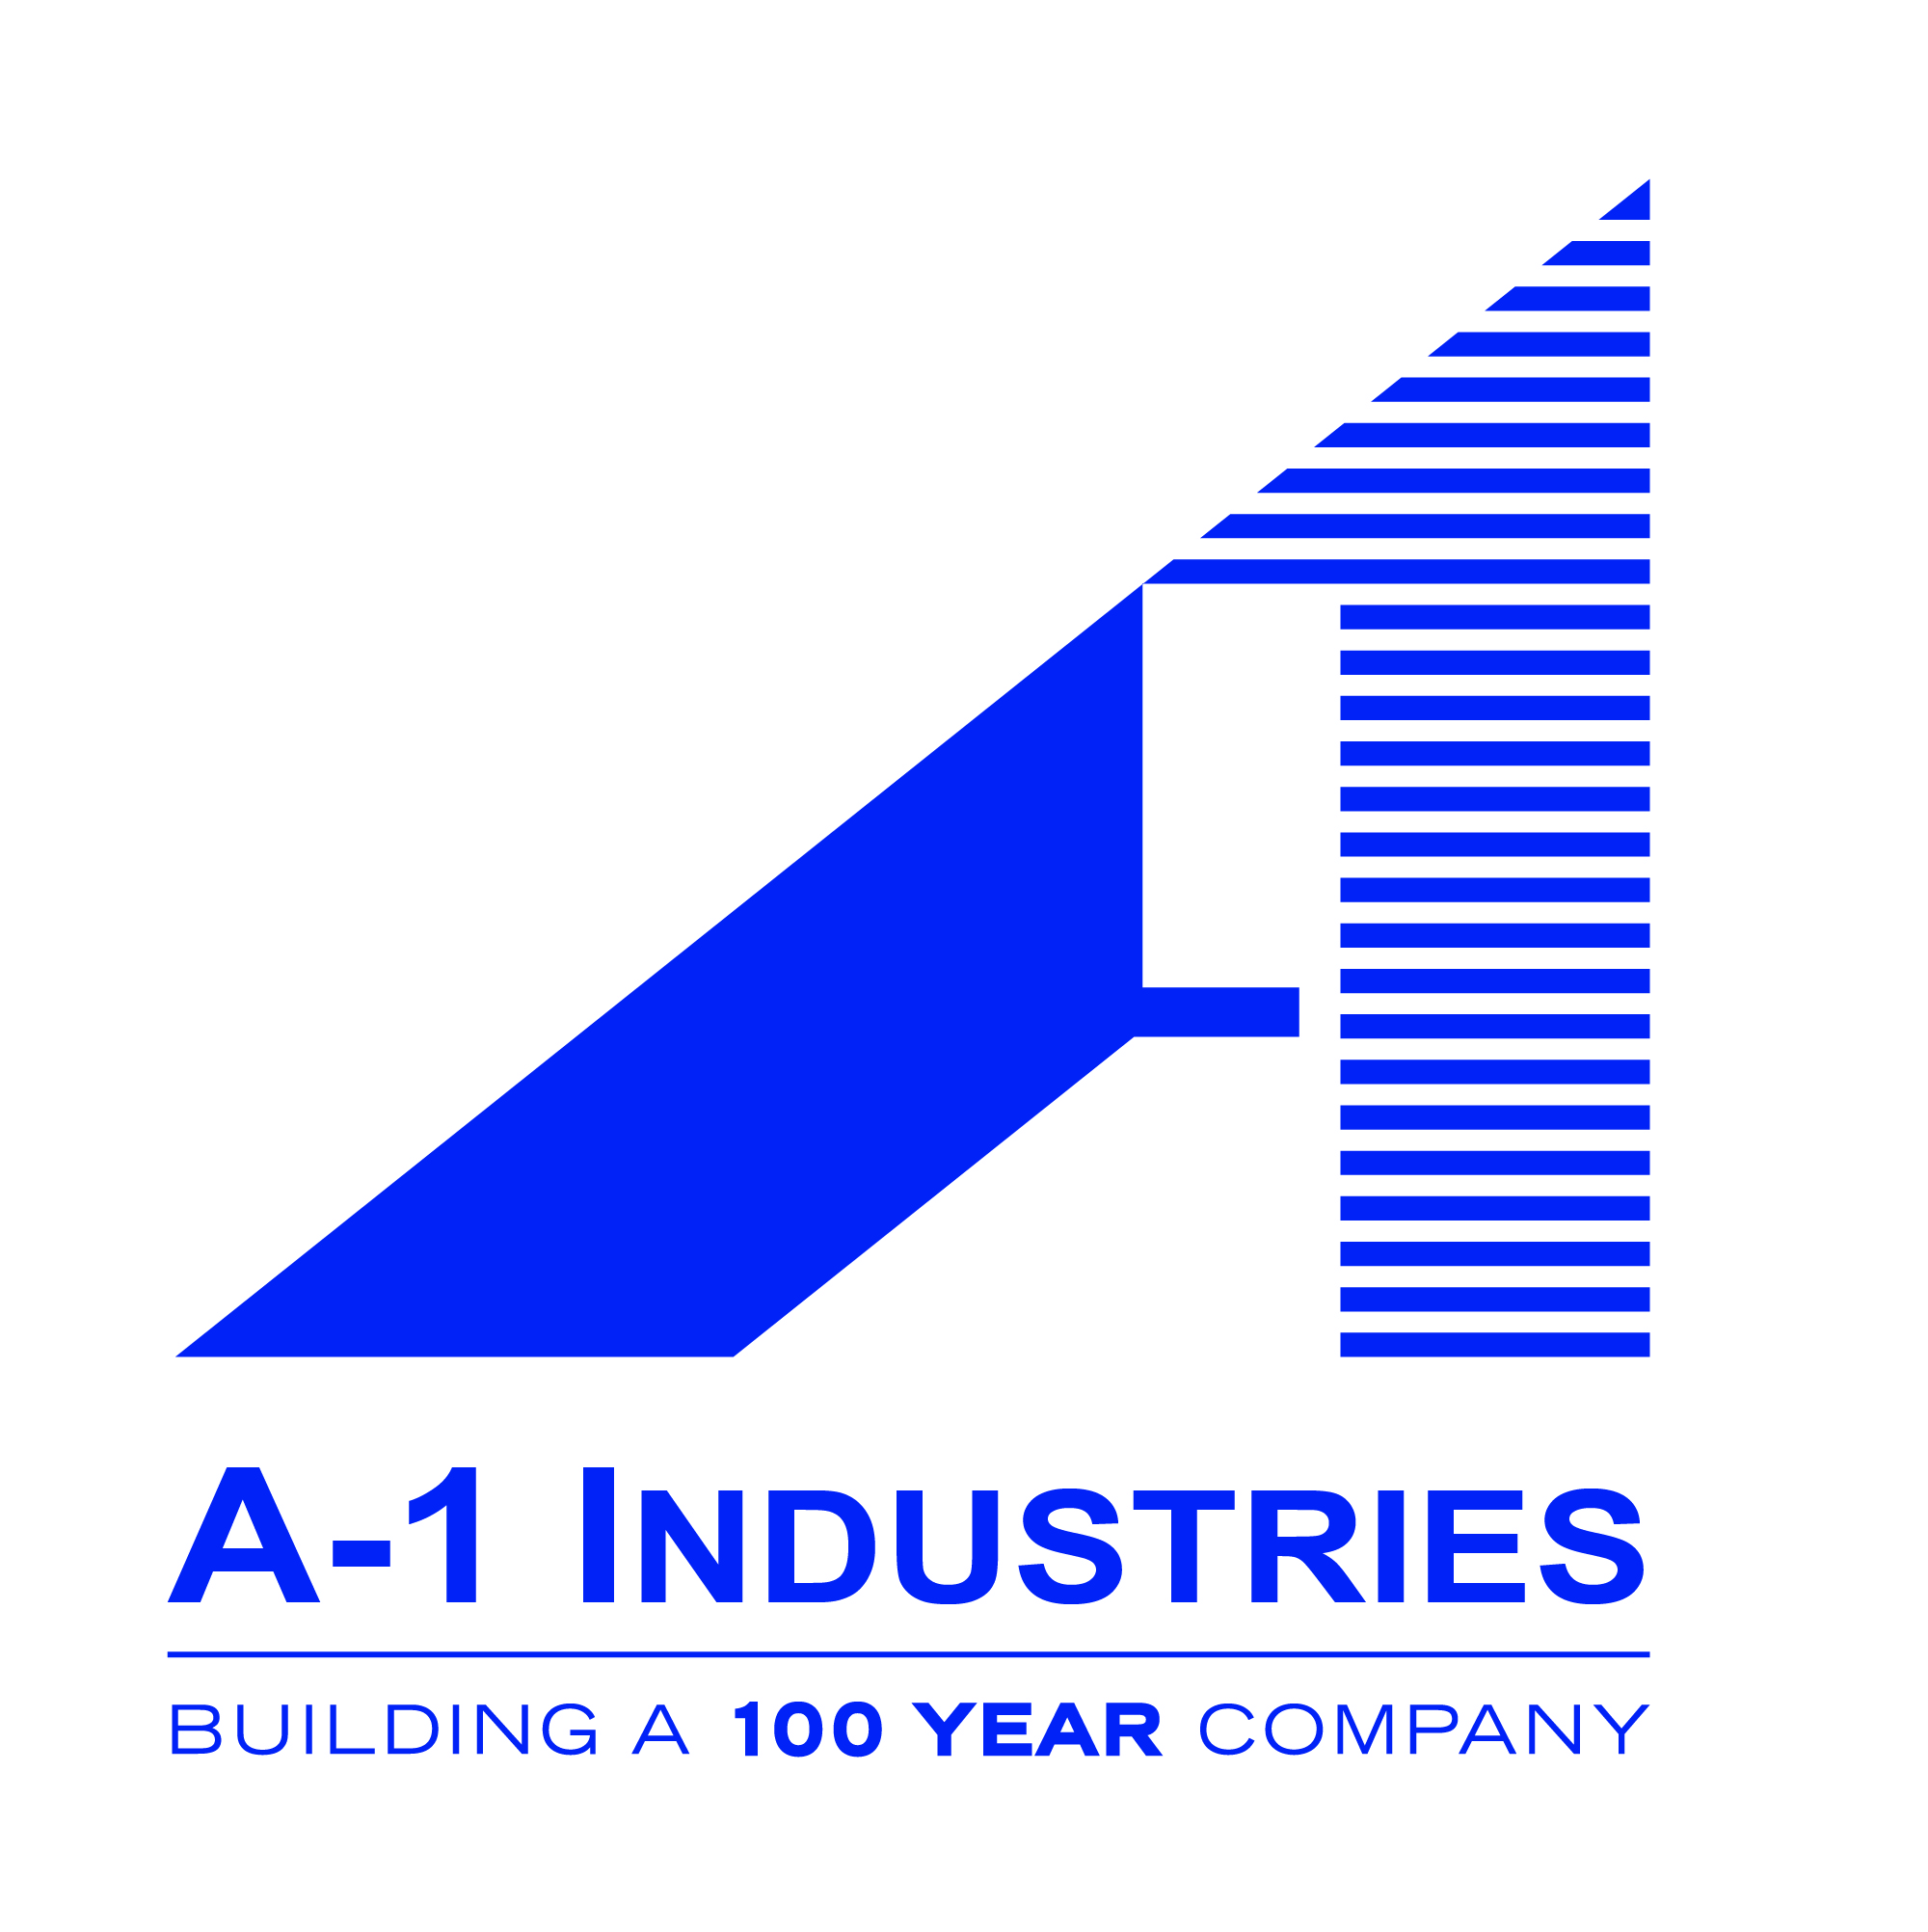 A-1 Industries